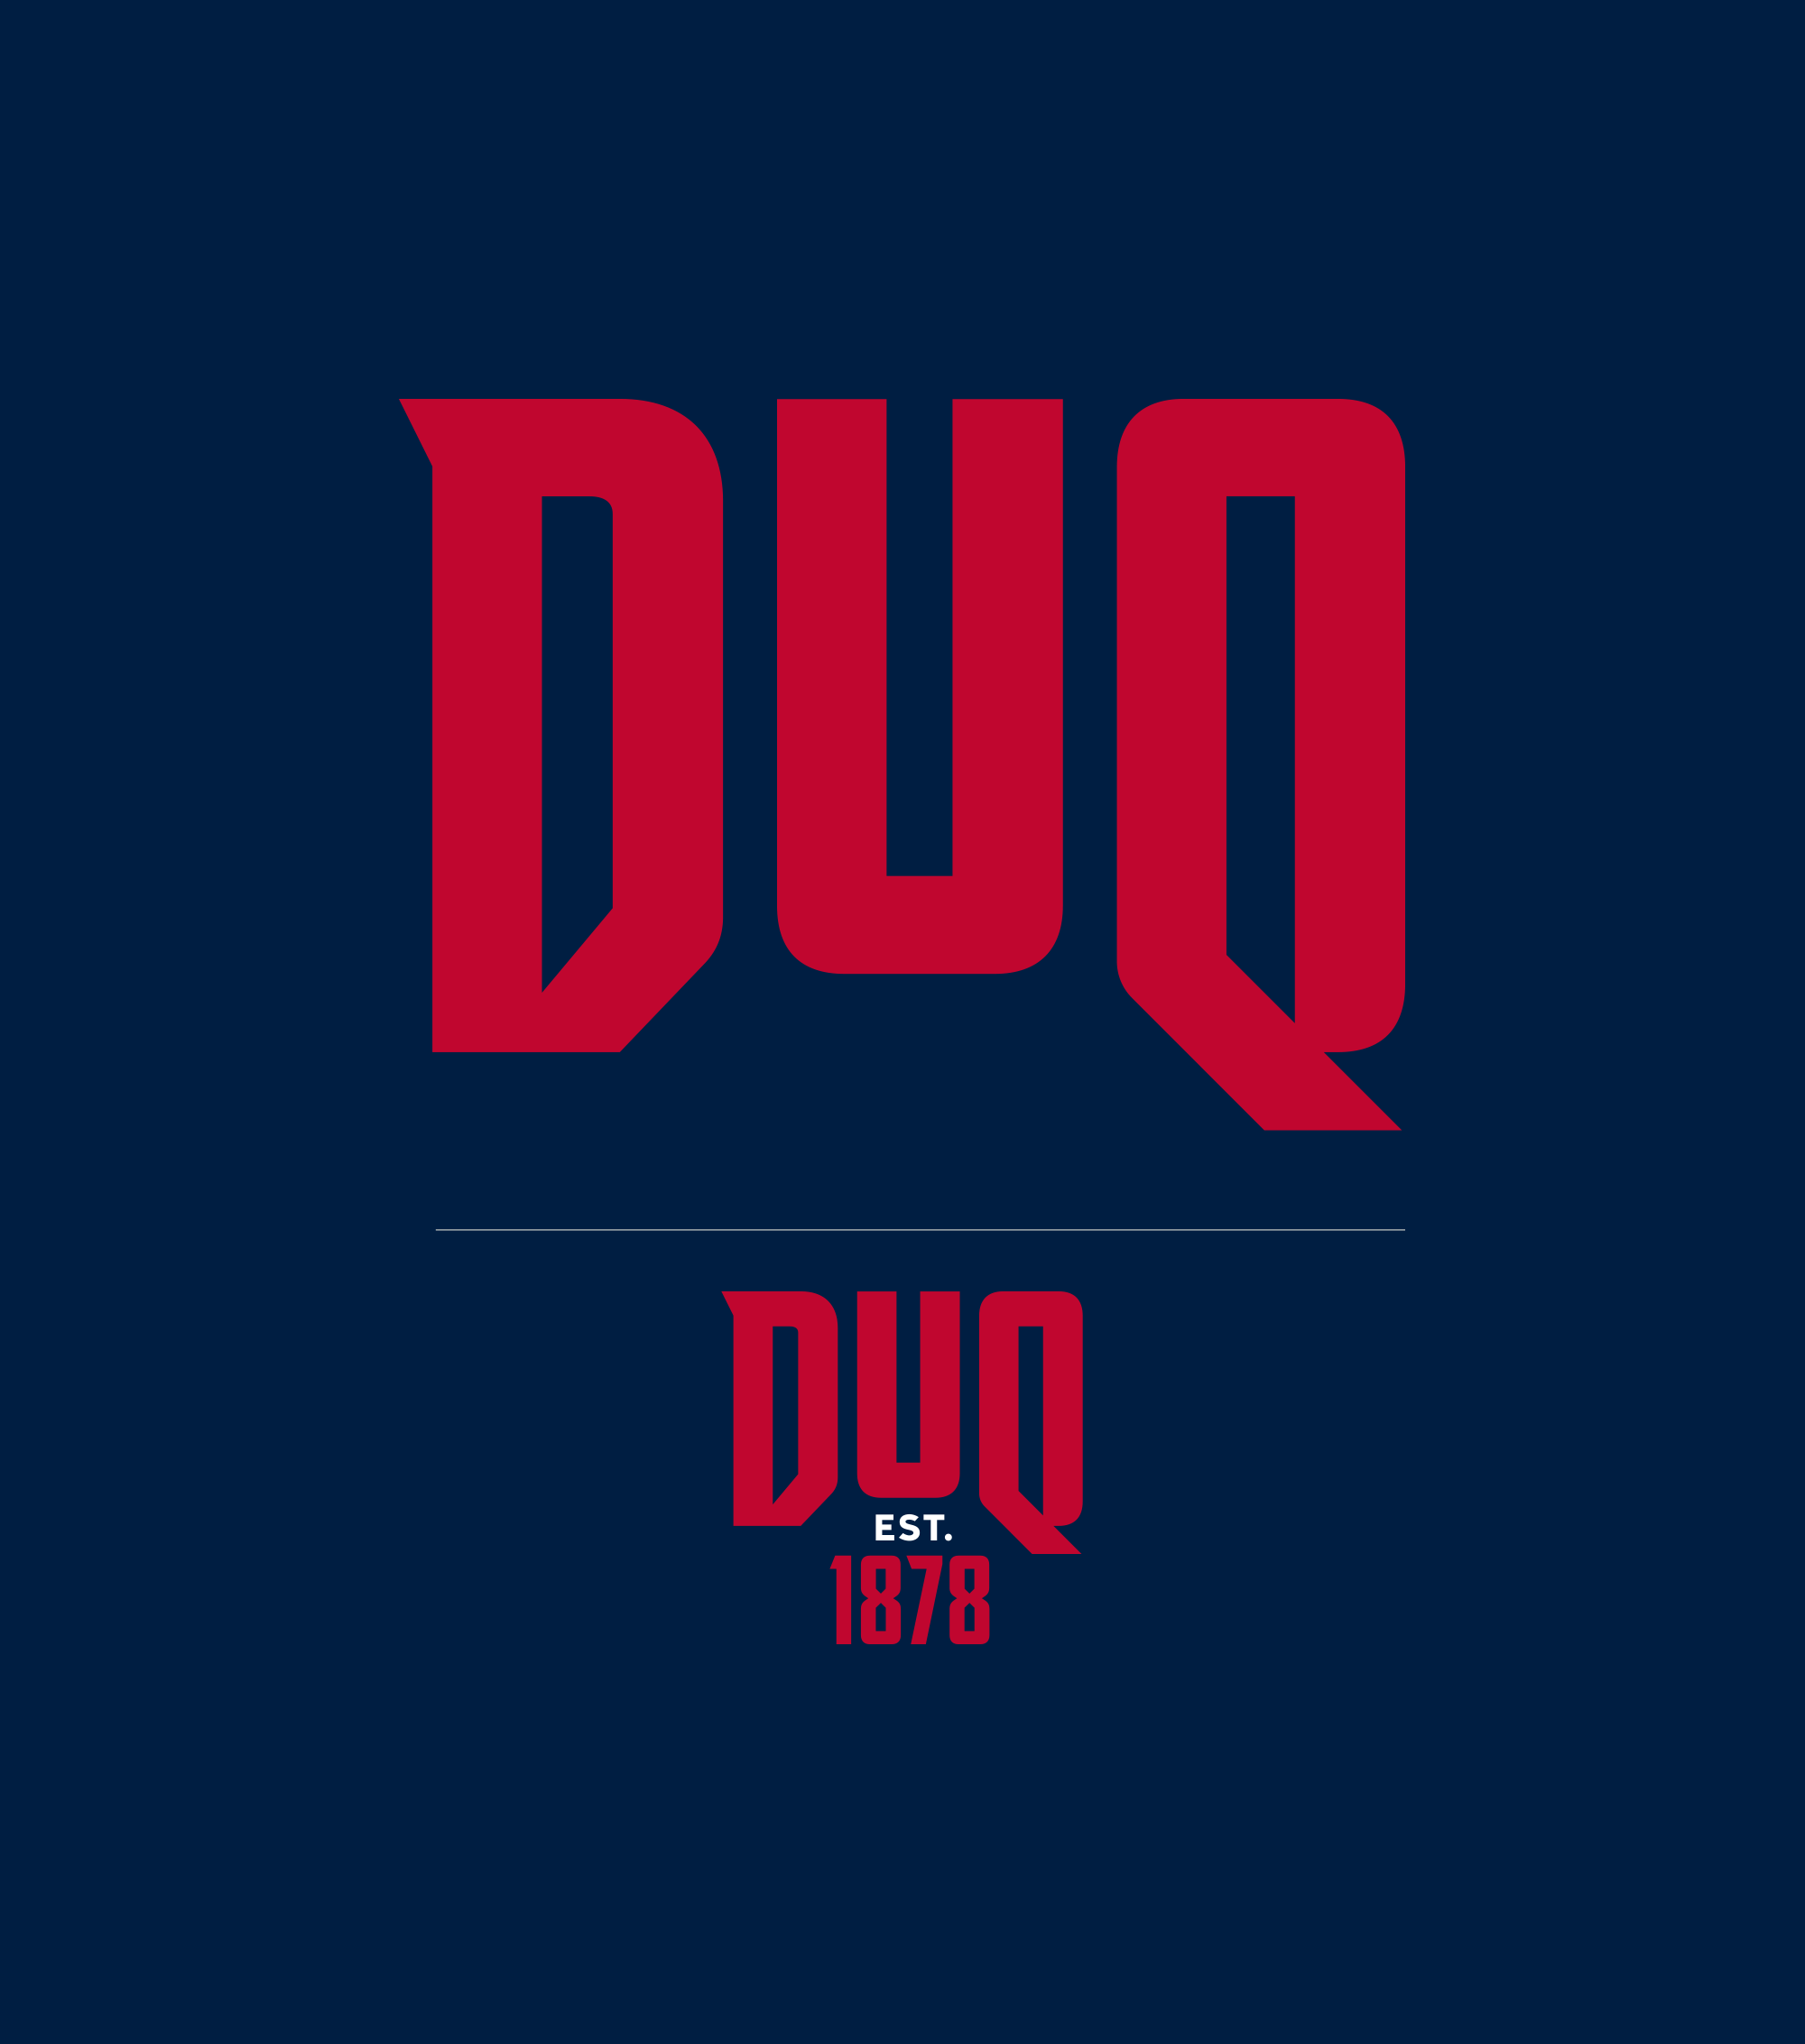 New Logo and Identity for Duquesne University Athletics by ChangeUp